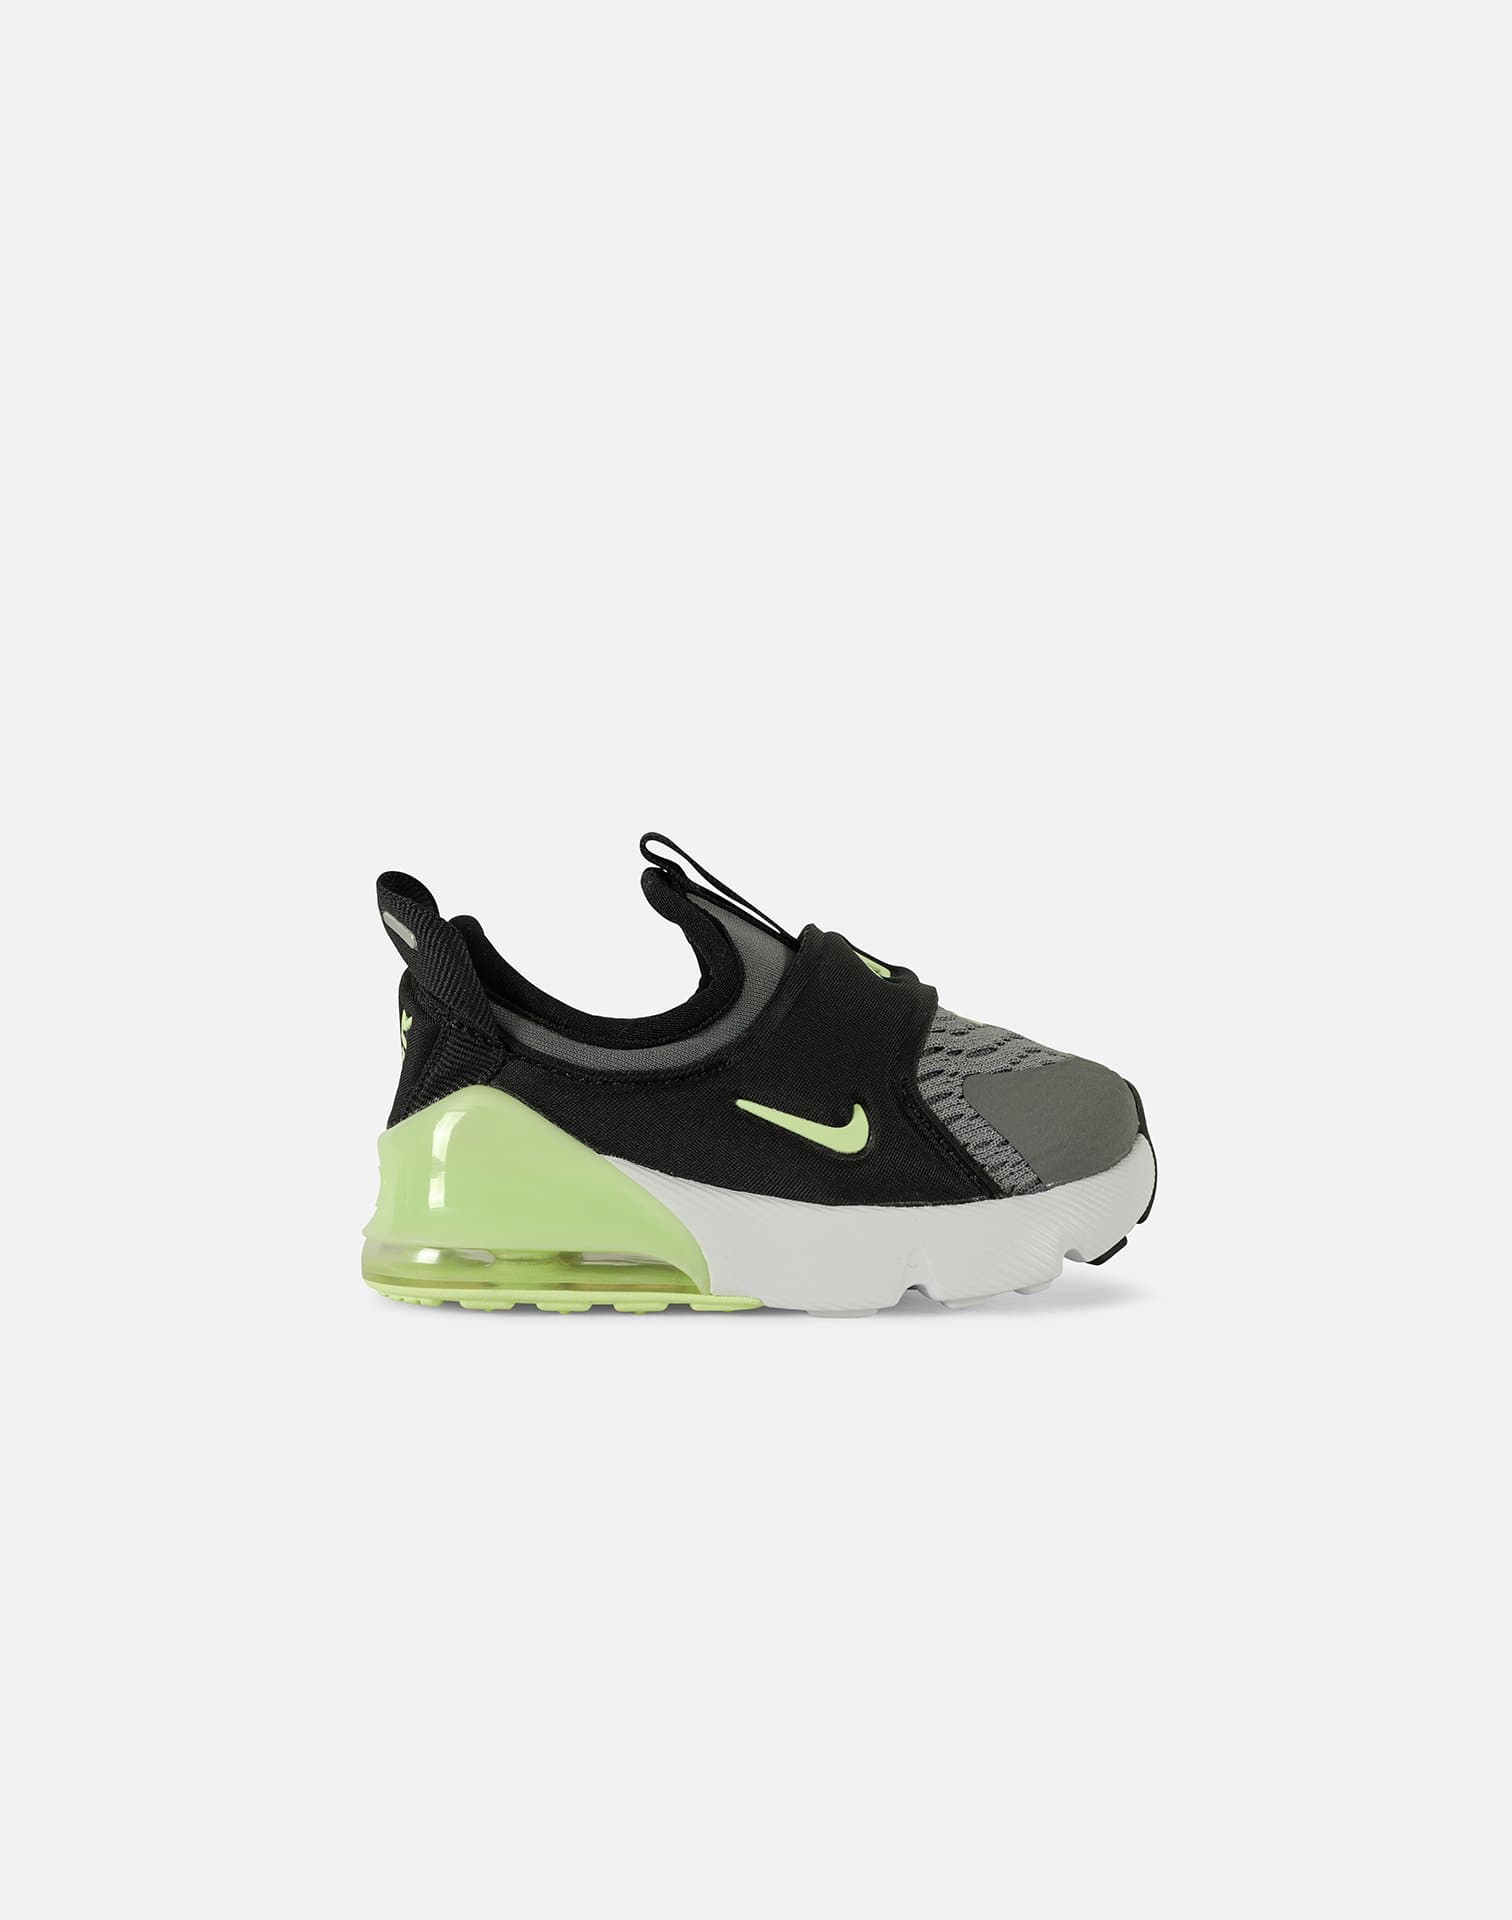 AIR MAX 270 EXTREME INFANT – DTLR